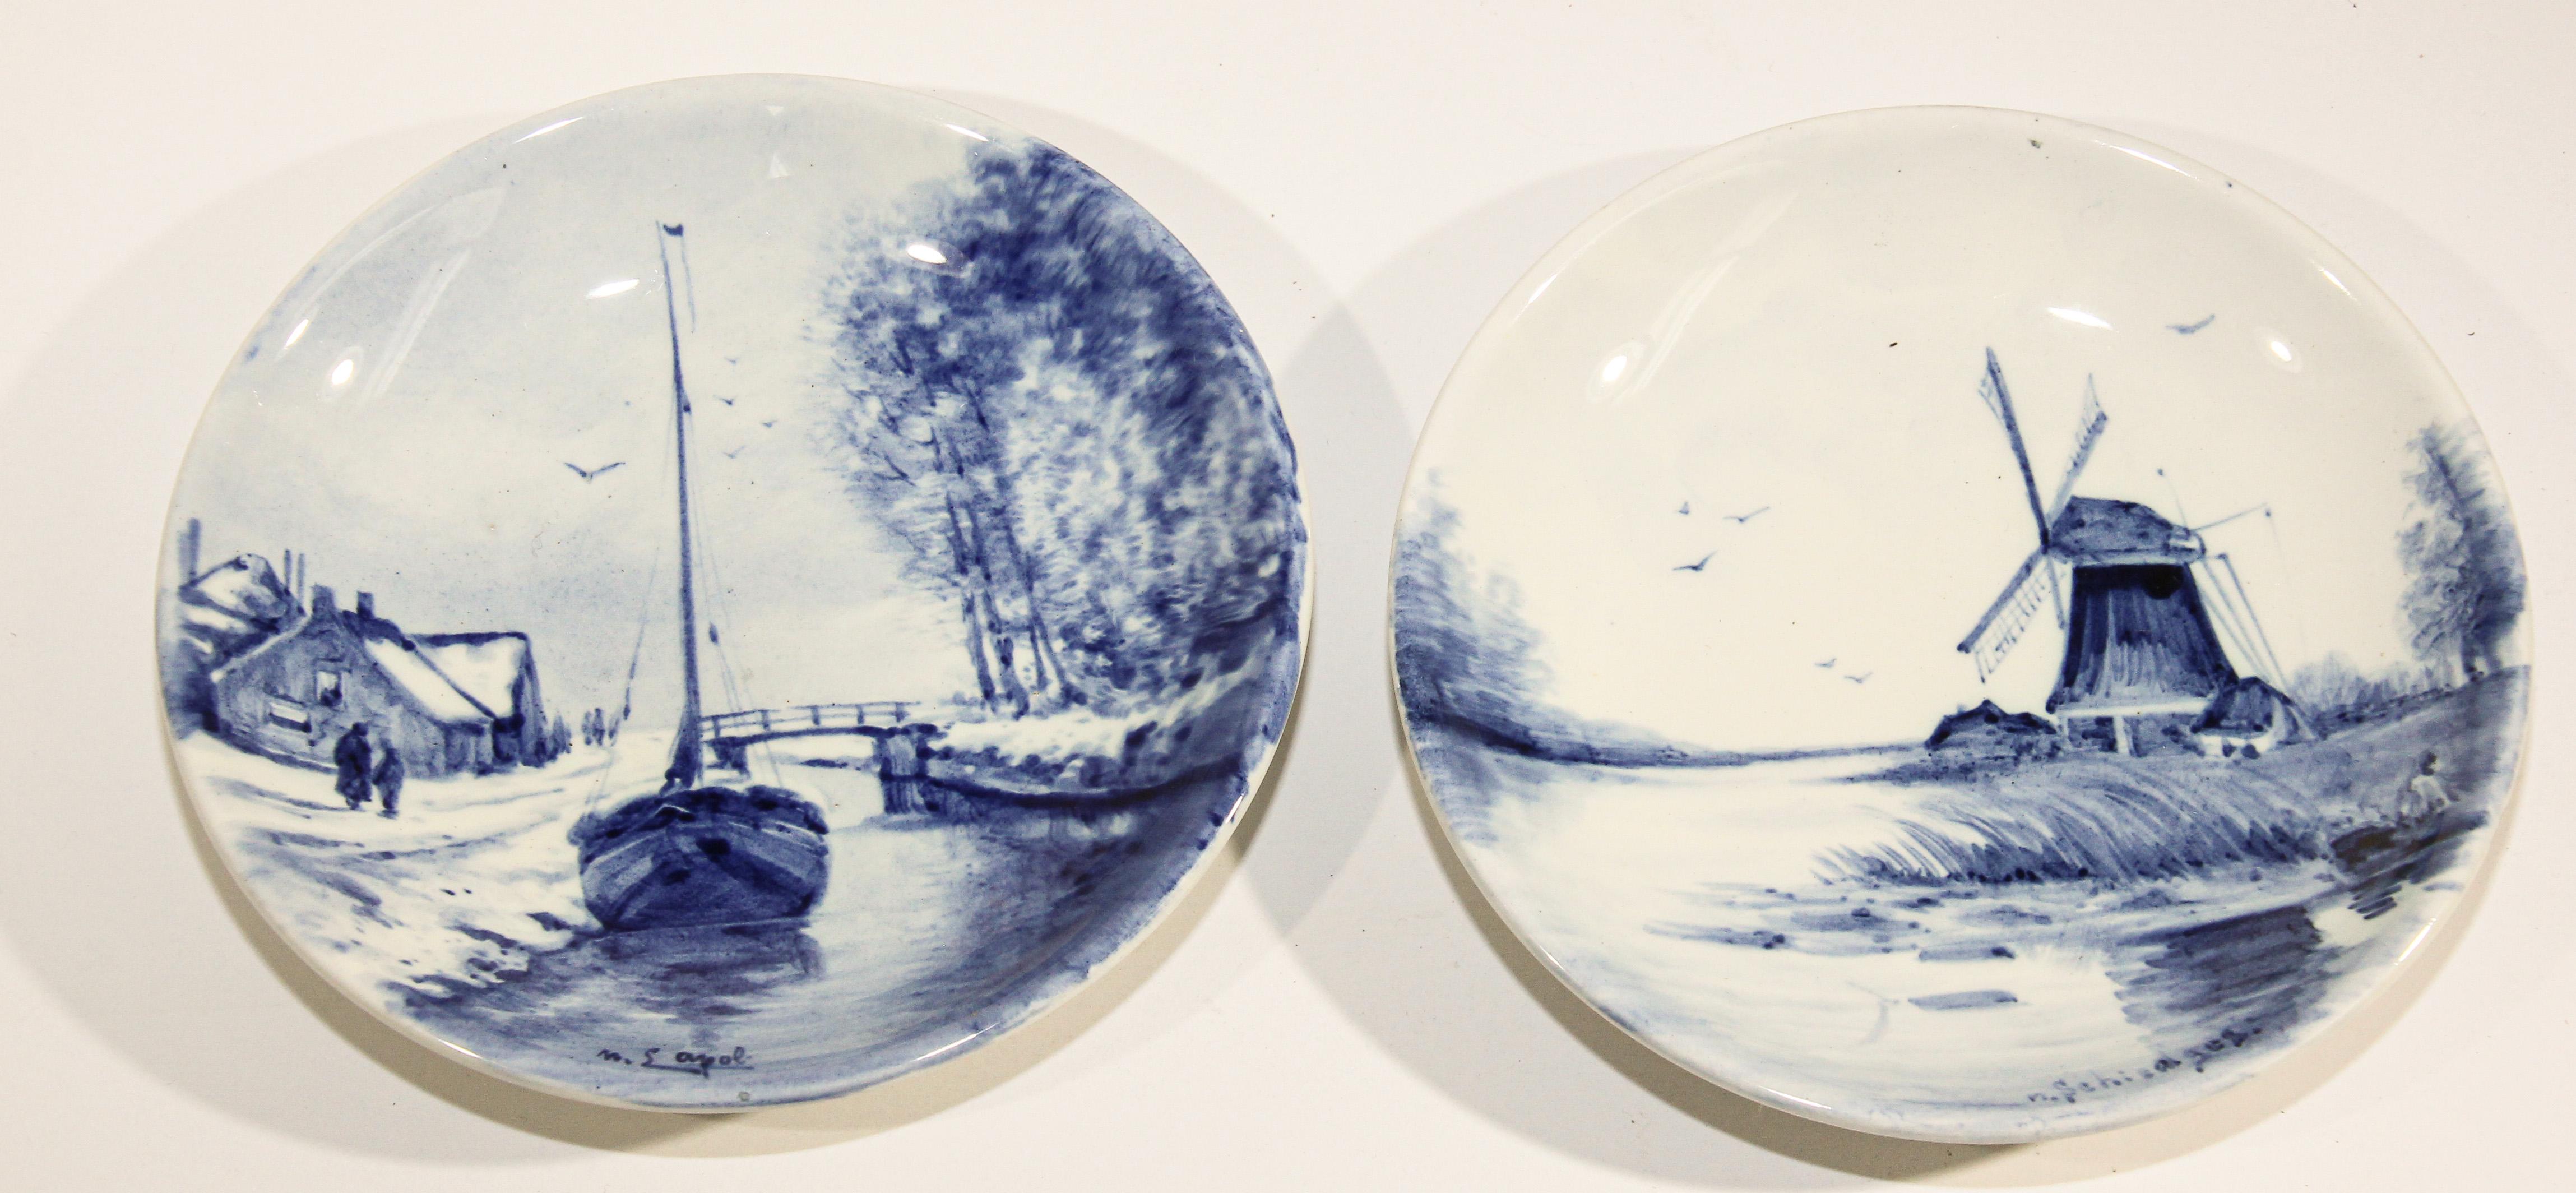 Stunning Boch Delfts blue and white plates in very good condition.
Each is signed and numbered by the artist.
It is beautiful hanging on a wall or on a coffee table.
Dutch Delft collectible decorative plates
The plates have scalloped edges